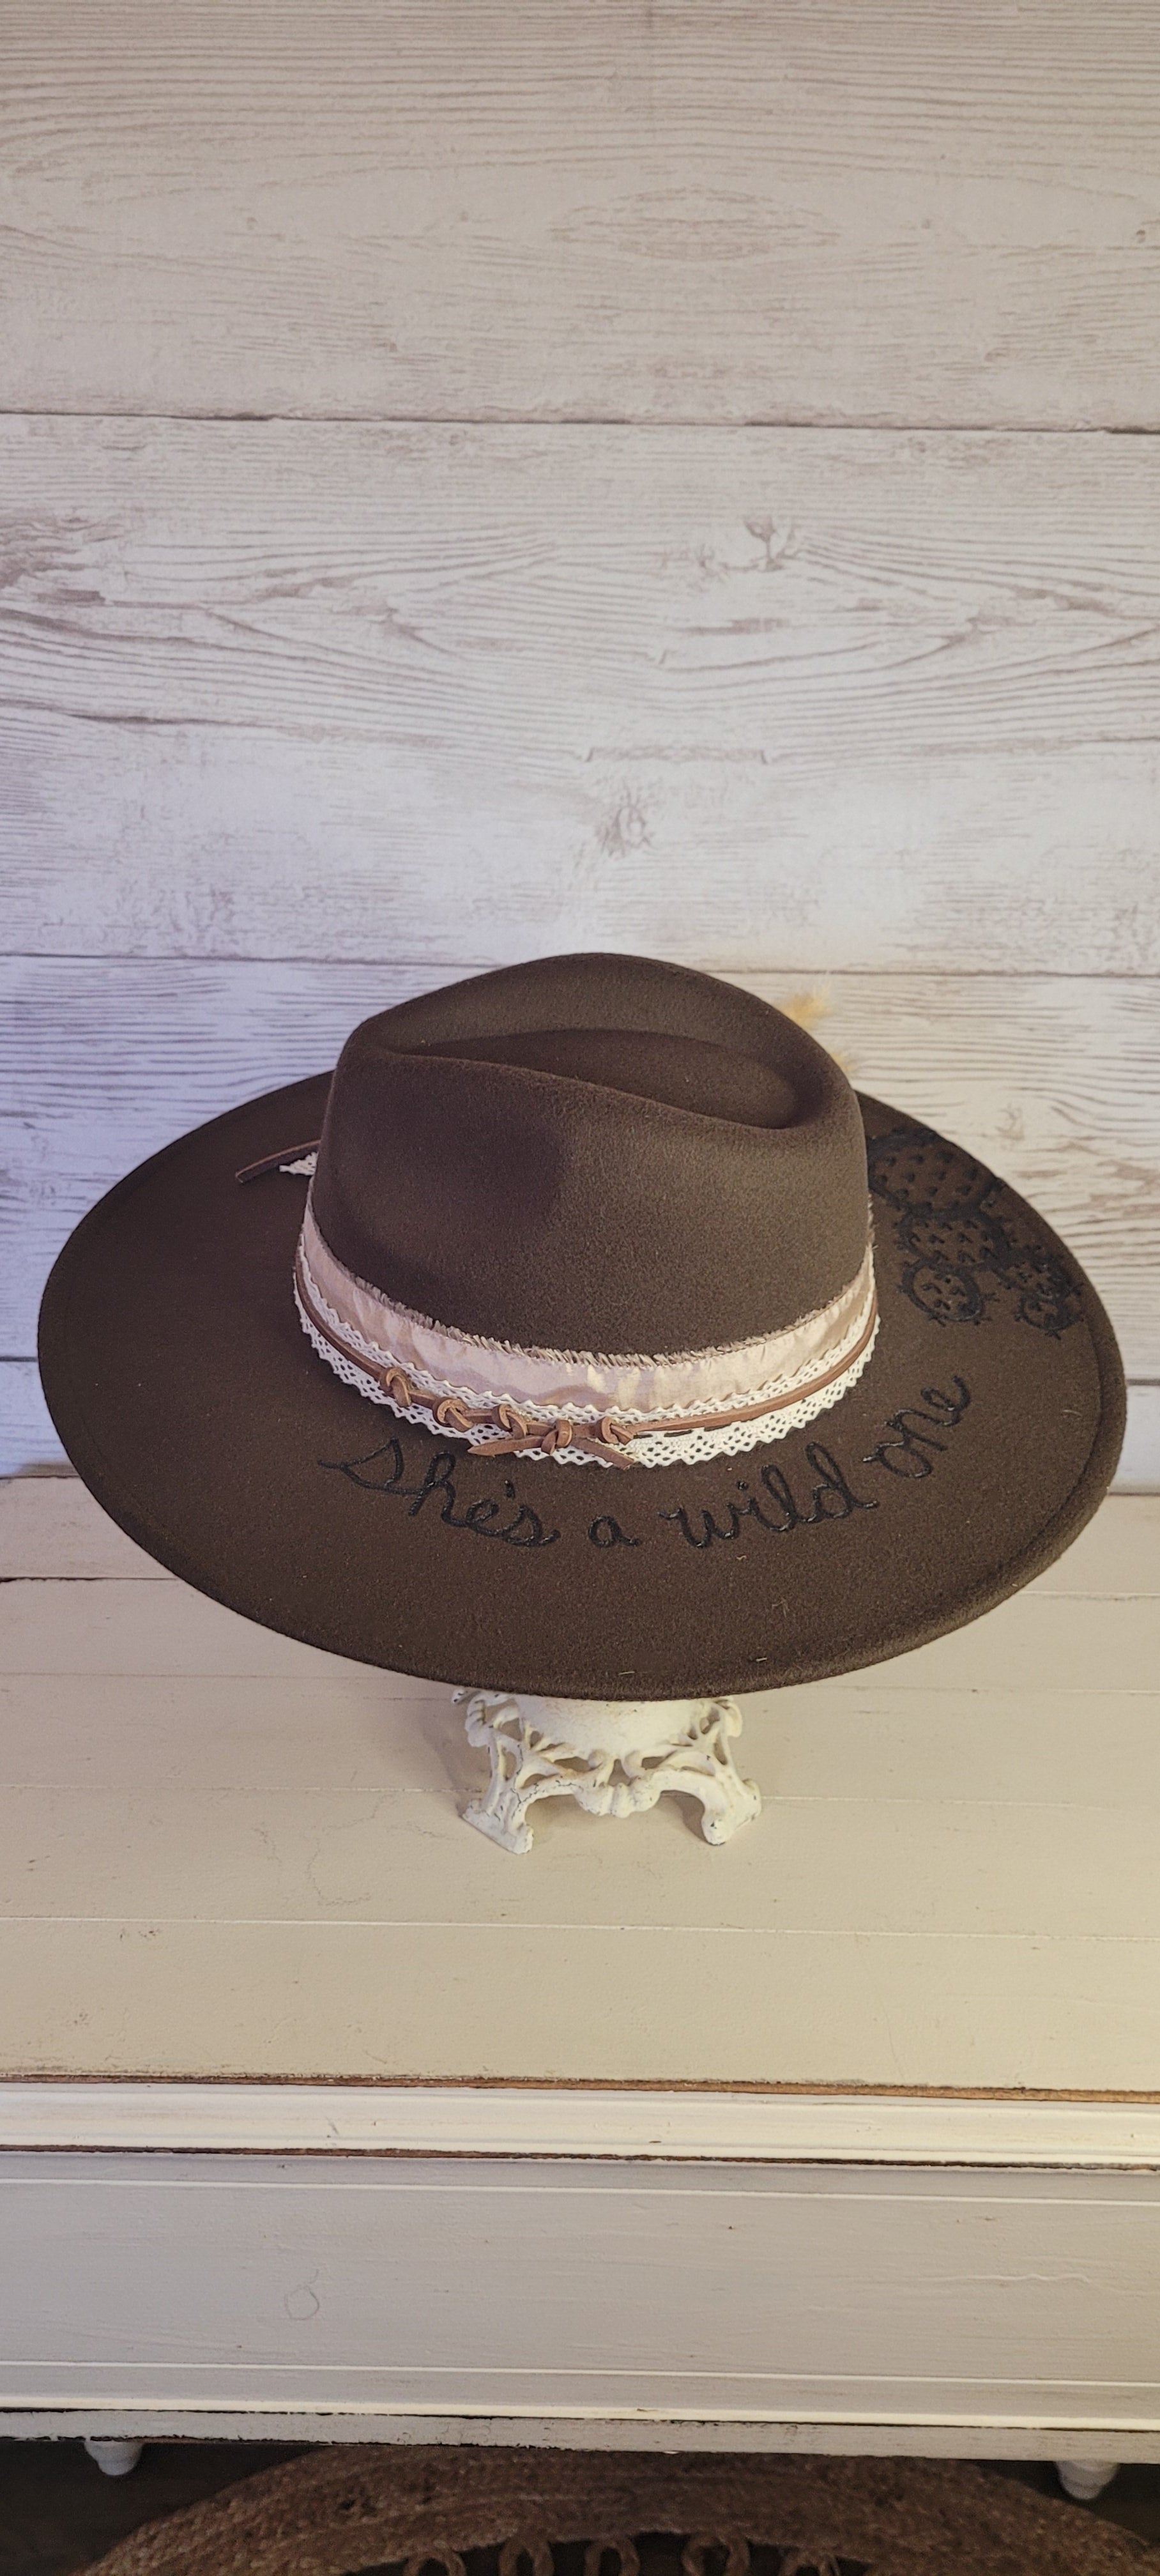 Features "She's a wild one" & cactus engraving Pampas, pine cones, light rose ribbon, natural lace ribbon, leather band Felt hat Flat brim 65% polyester and 35% cotton Ribbon drawstring for hat size adjustment Head Circumference: 24" Crown Height: 5" Brim Length: 15.75" Brim Width: 14.5" Branded & numbered inside crown Custom designed by Kayla